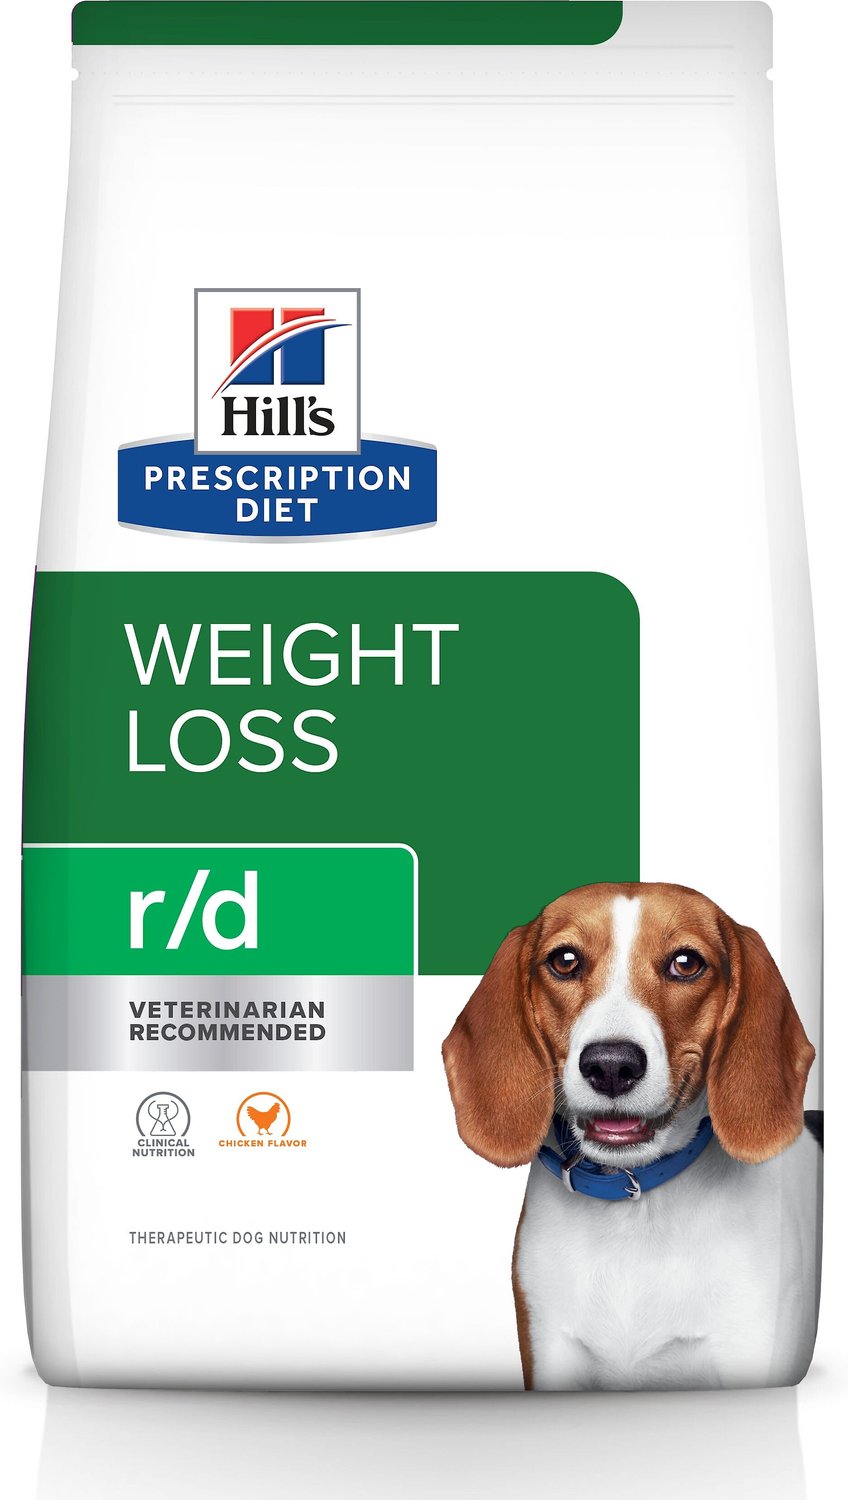 dog food by weight